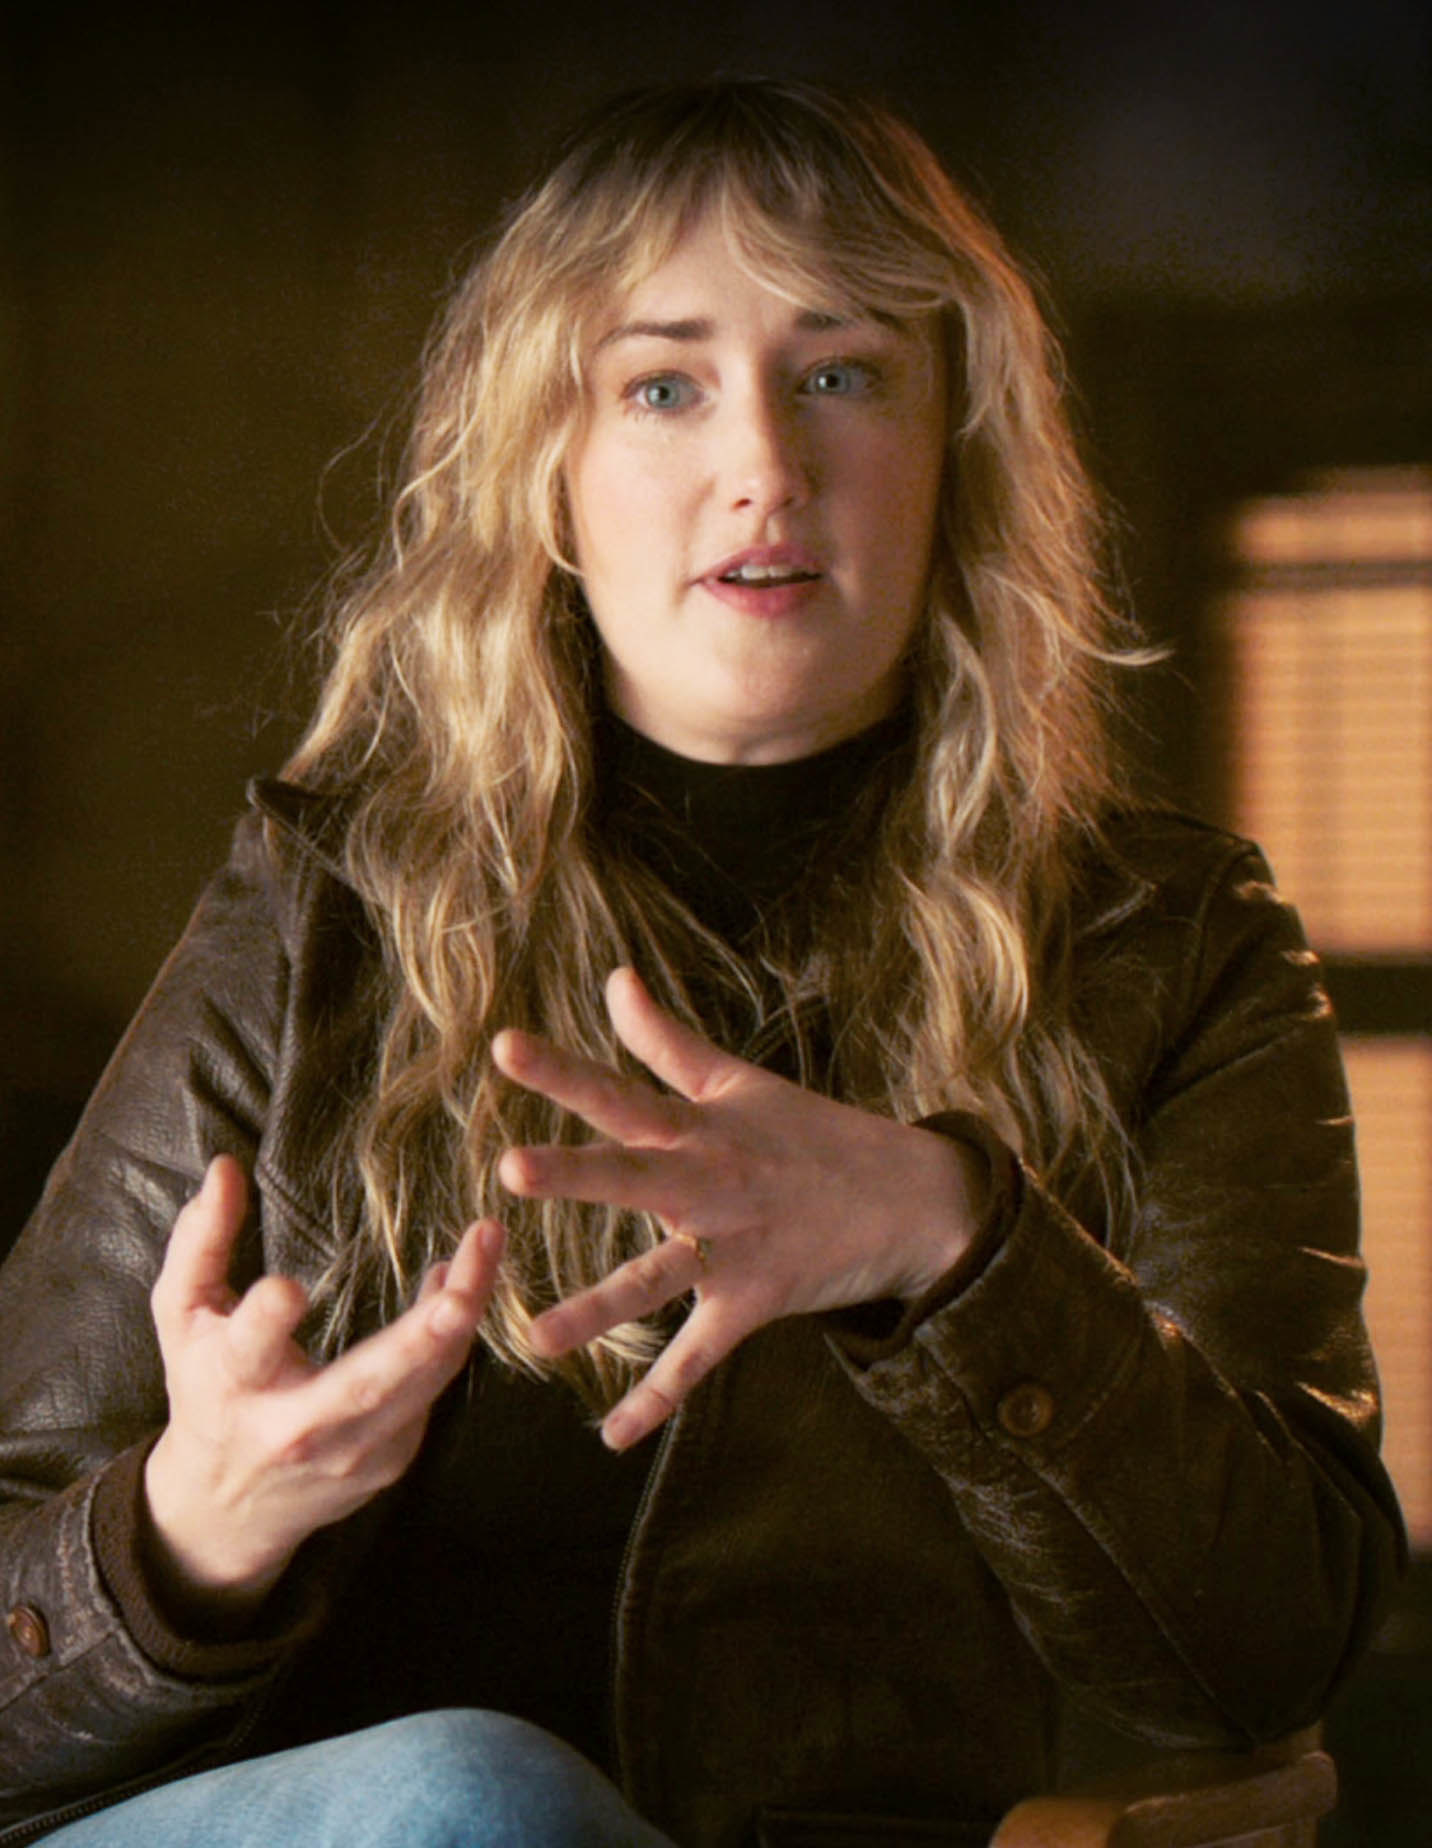 Meet Ashley Johnson, Actress Who Plays Ellie in The Last of Us Games